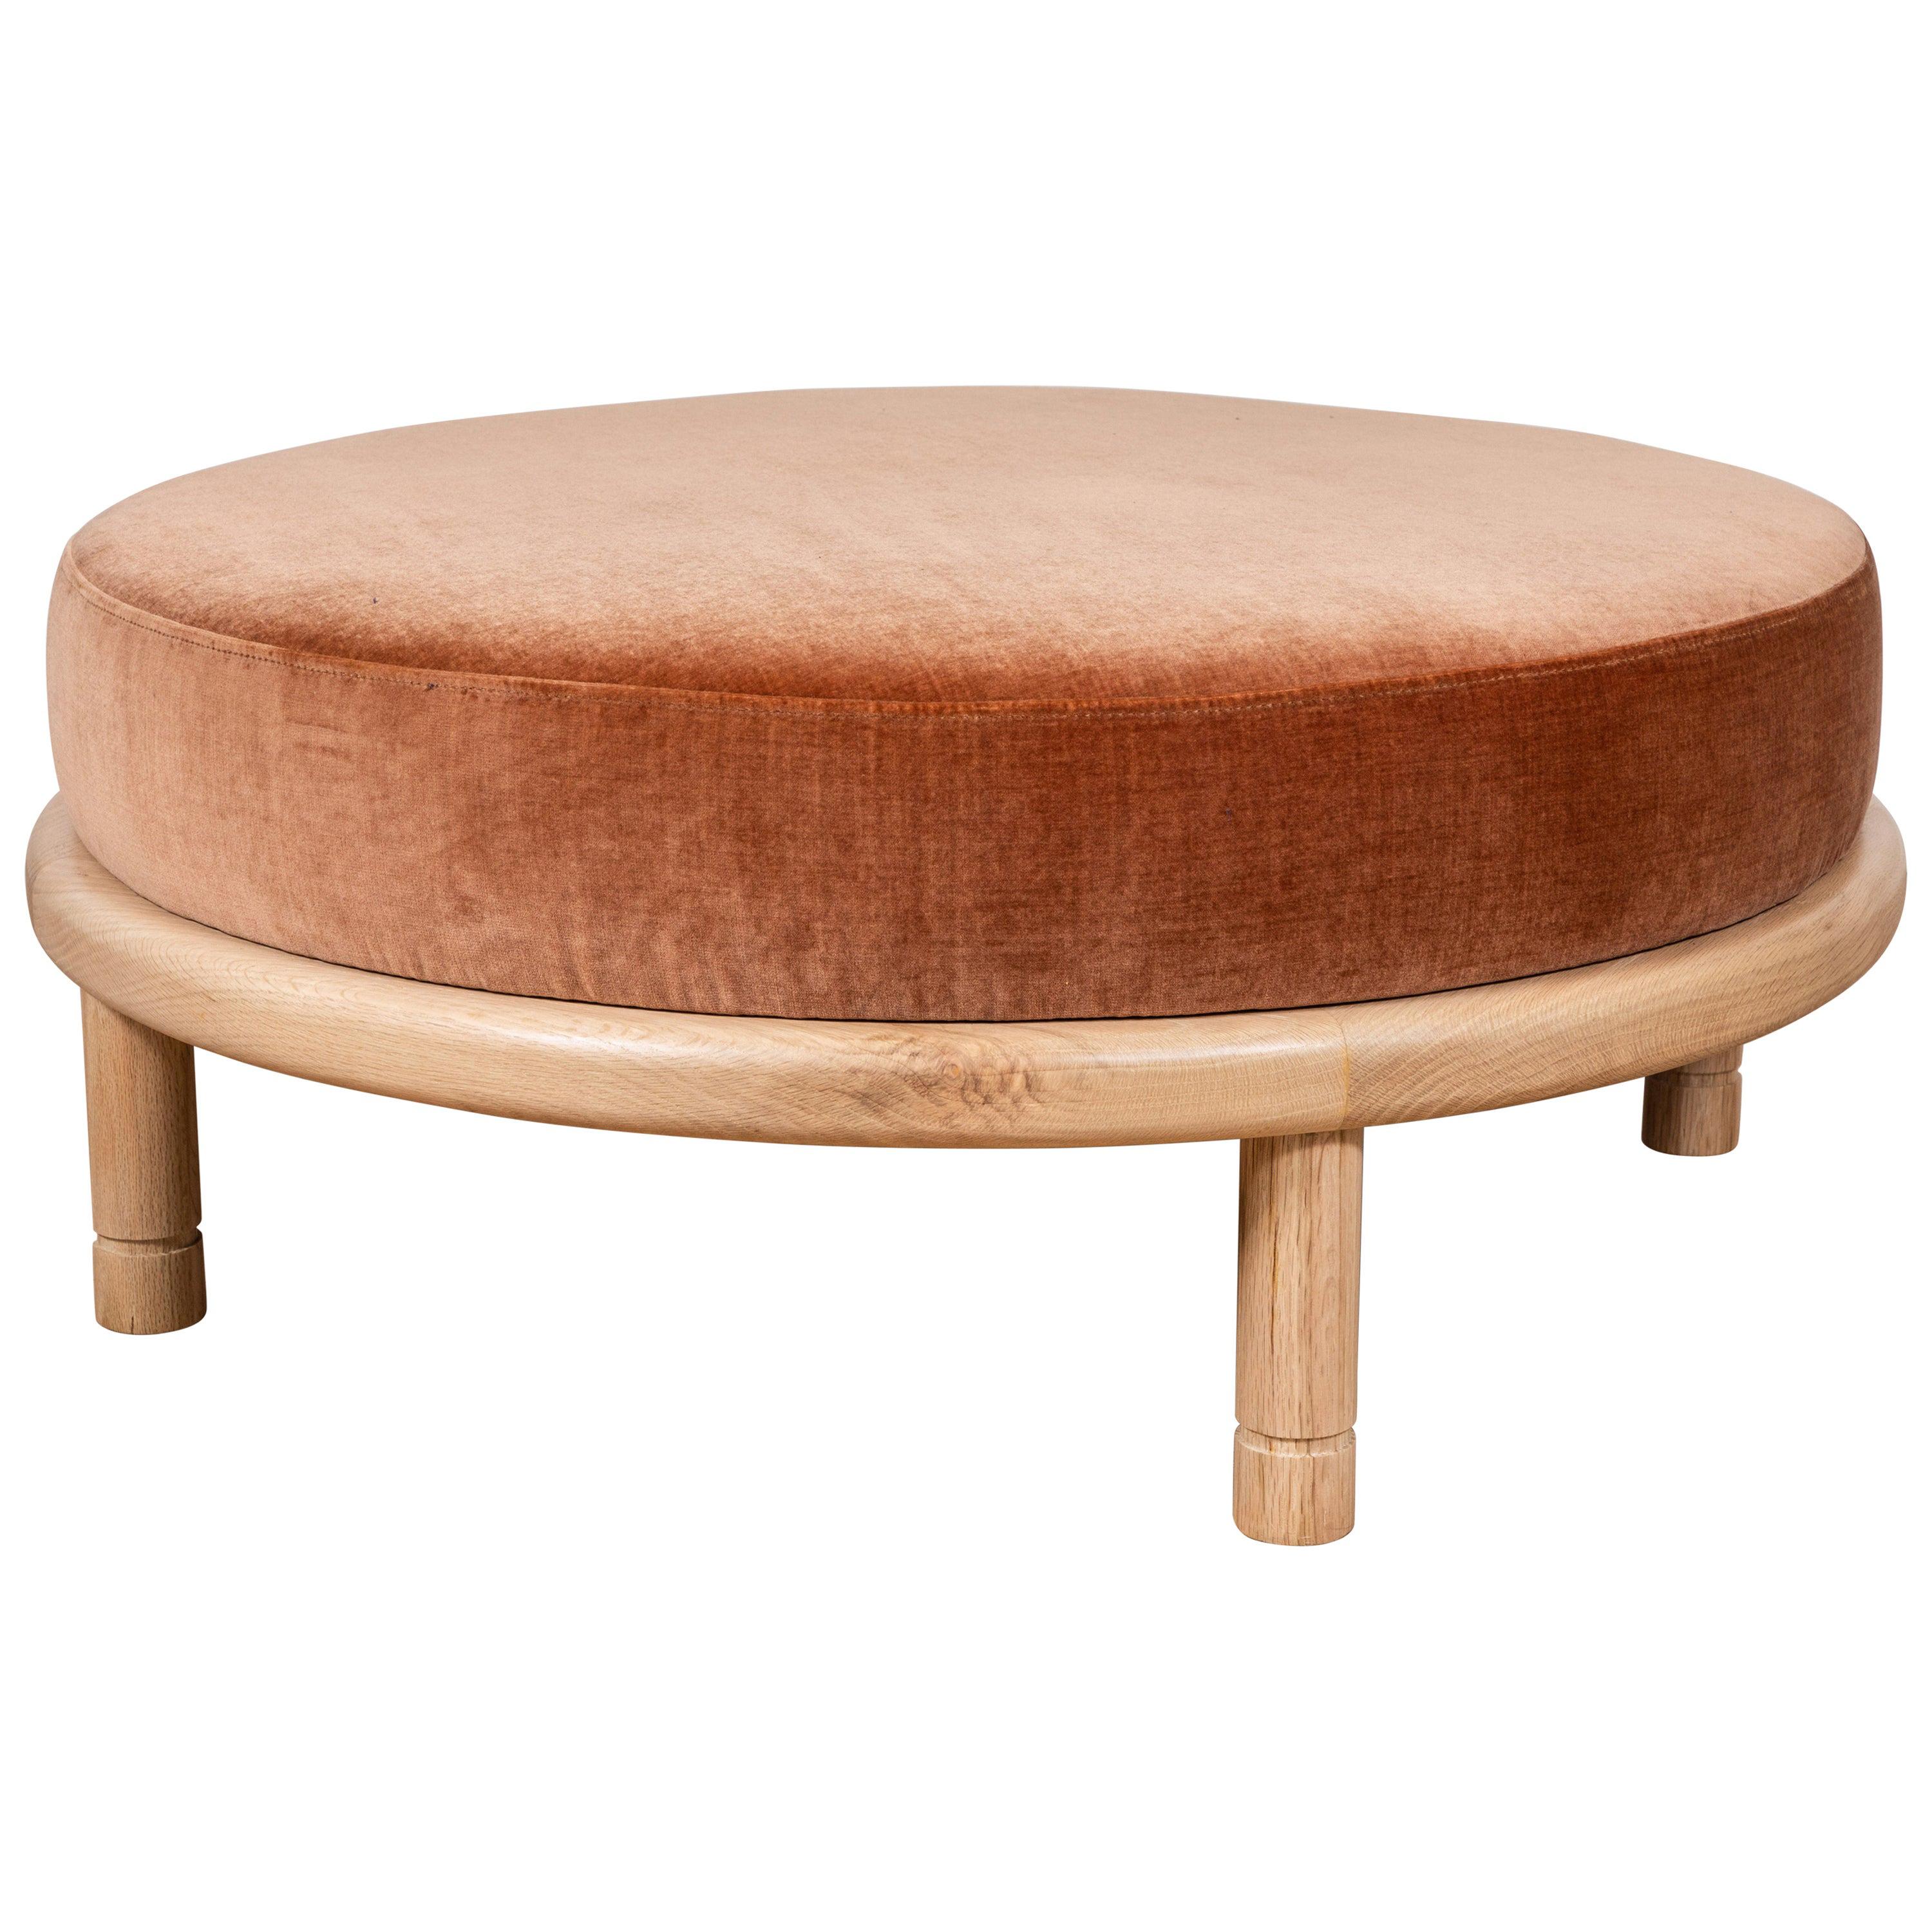 Velvet and Natural Oak Moreno Ottoman by Lawson-Fenning